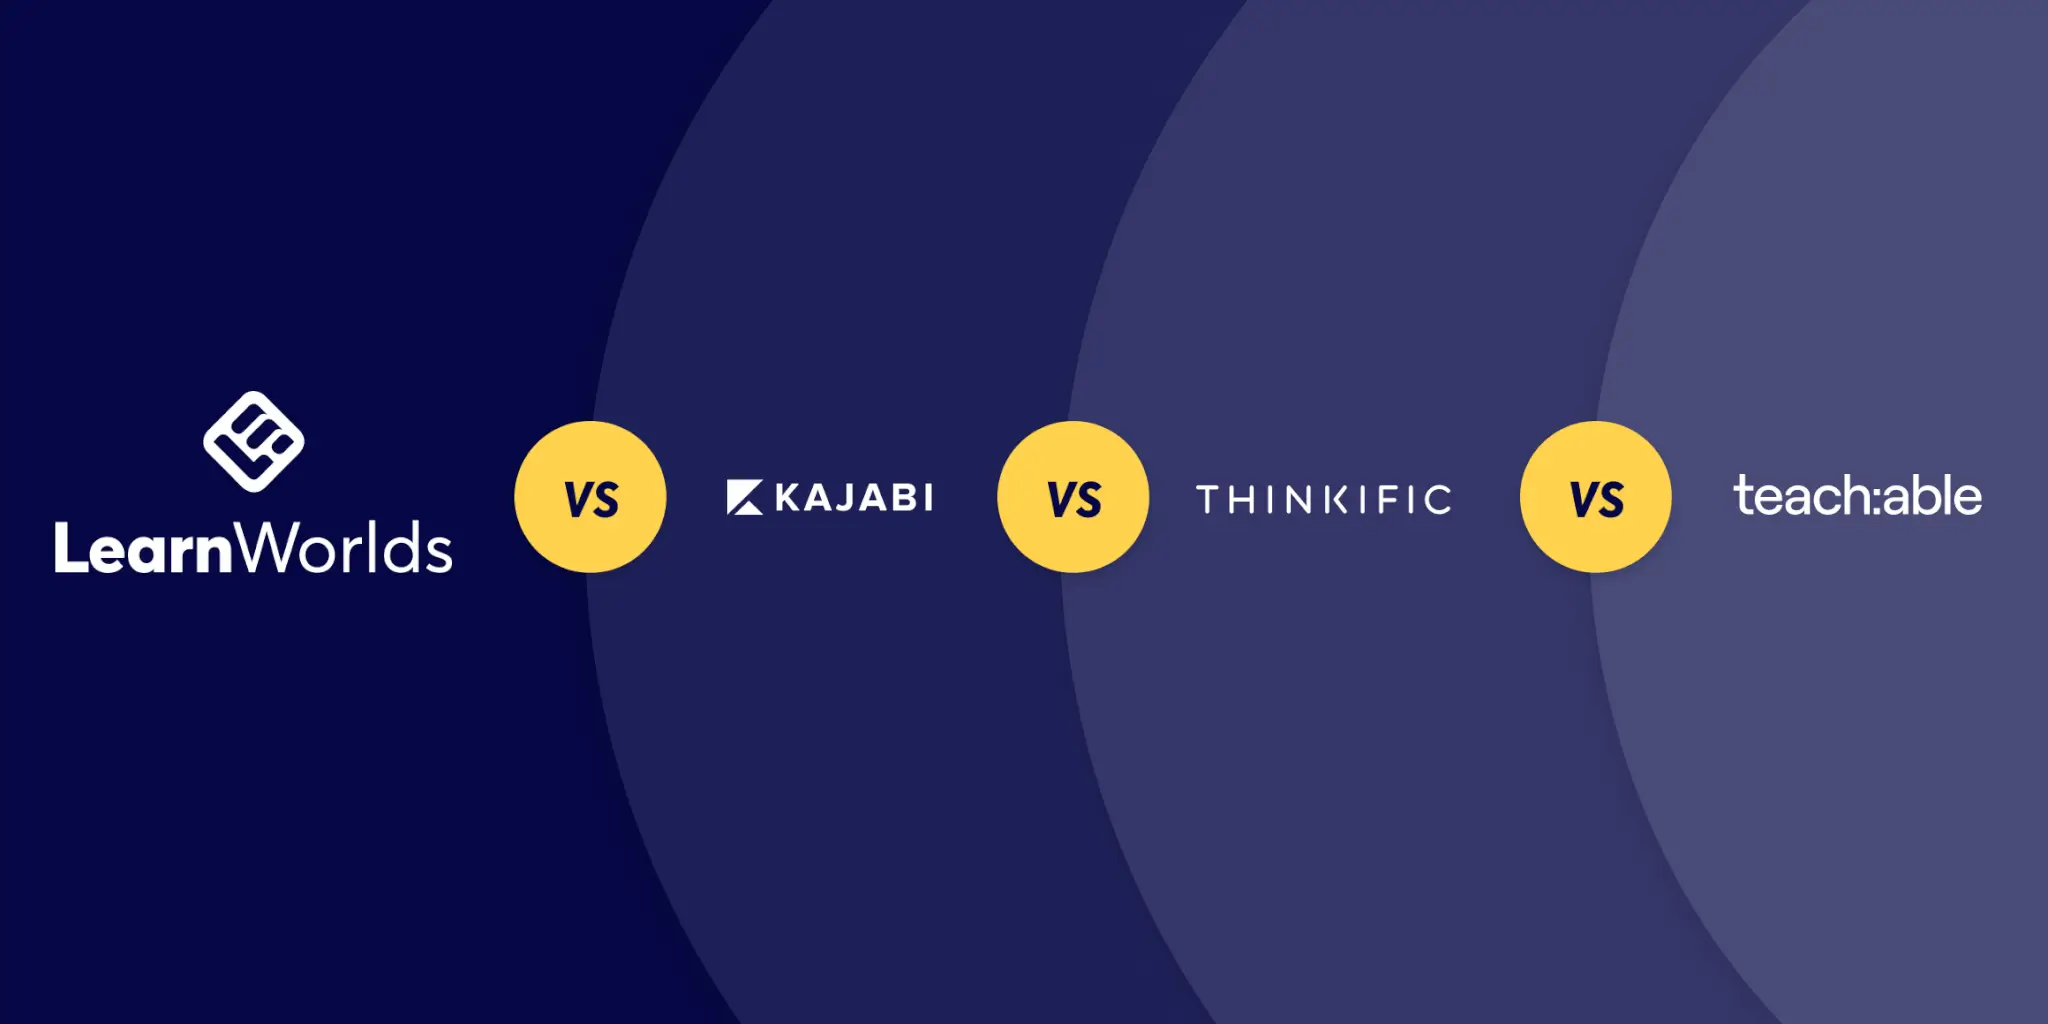 Compare LearnWorlds vs Kajabi vs Thinkific vs Teachable, which is the best online course platform in the market?